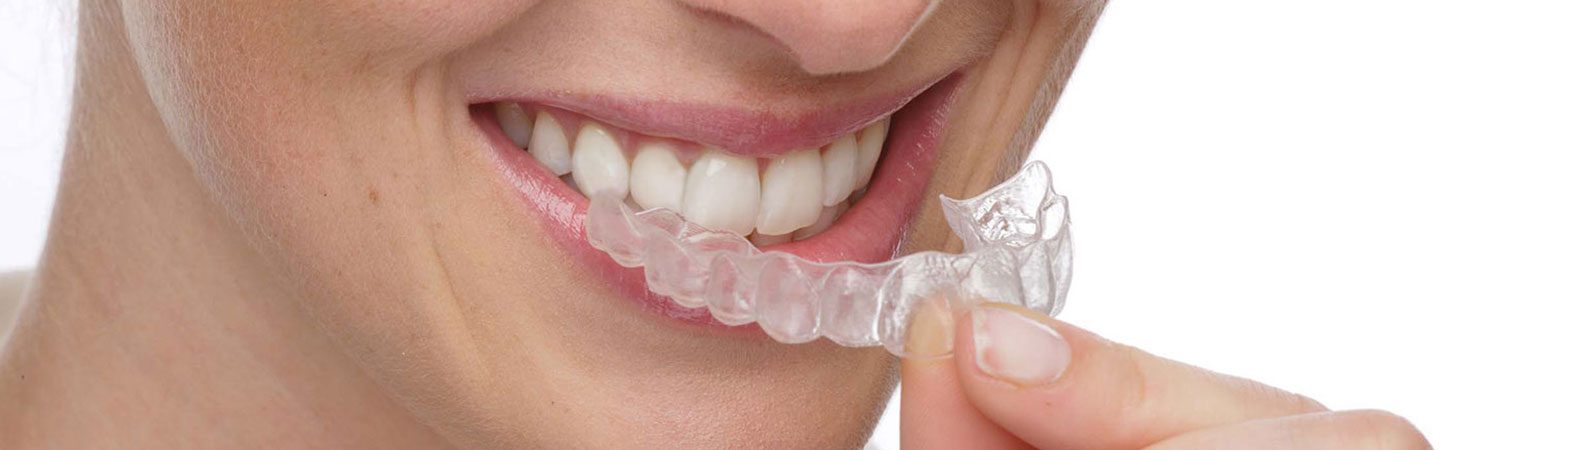 A Better Orthodontic Solution — Fix Your Smile With Invisalign